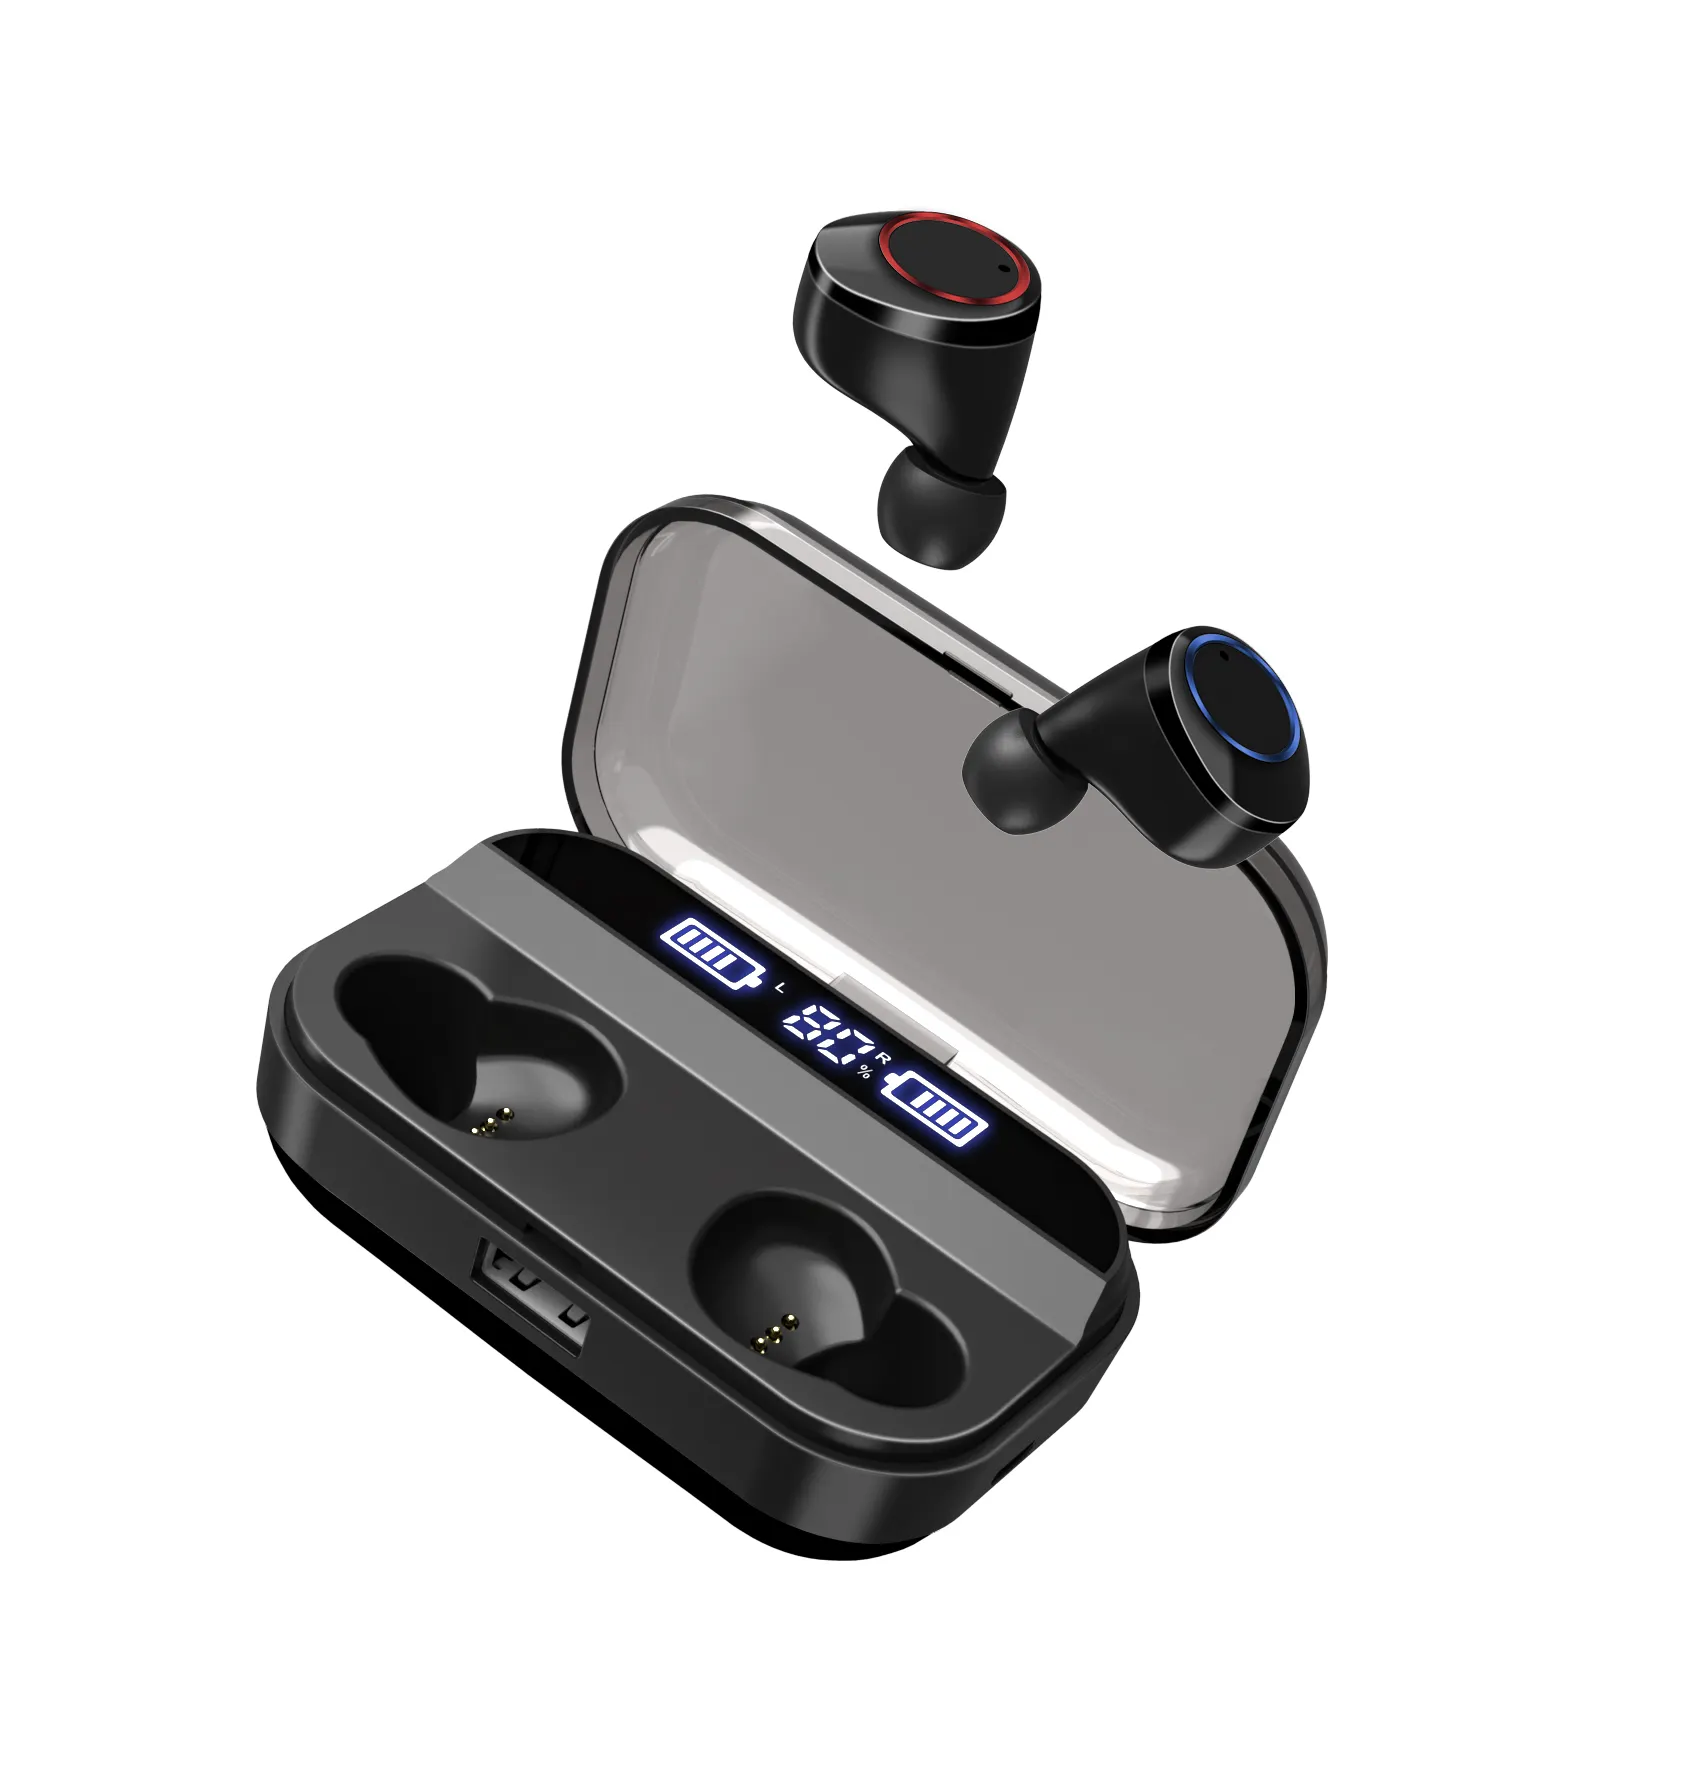 SSA New Tws Earbuds Bluetooth 5.0 Ipx7 Waterproof X11 bluetooth earphone With Battery Led Display